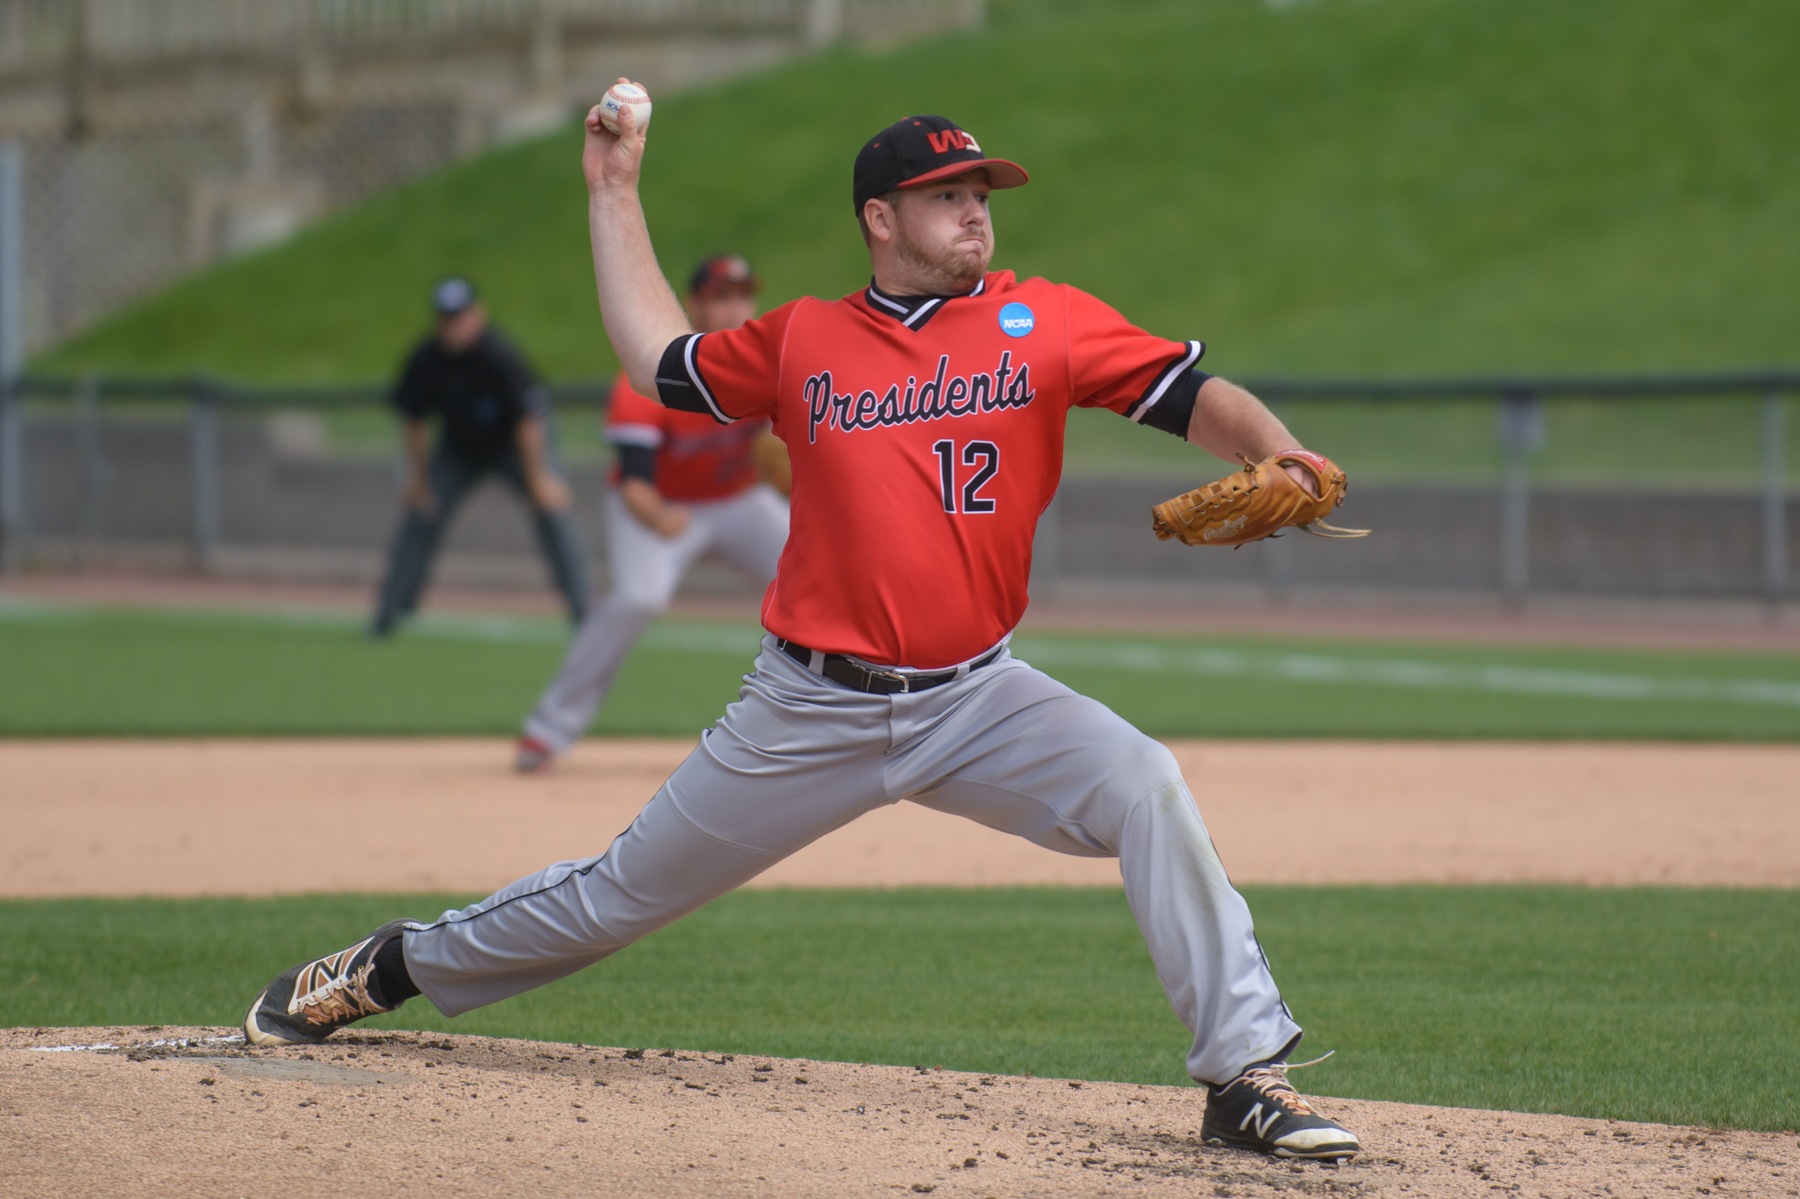 The Presidents' Matt Heslin scattered nine hits in recording a complete-game victory.